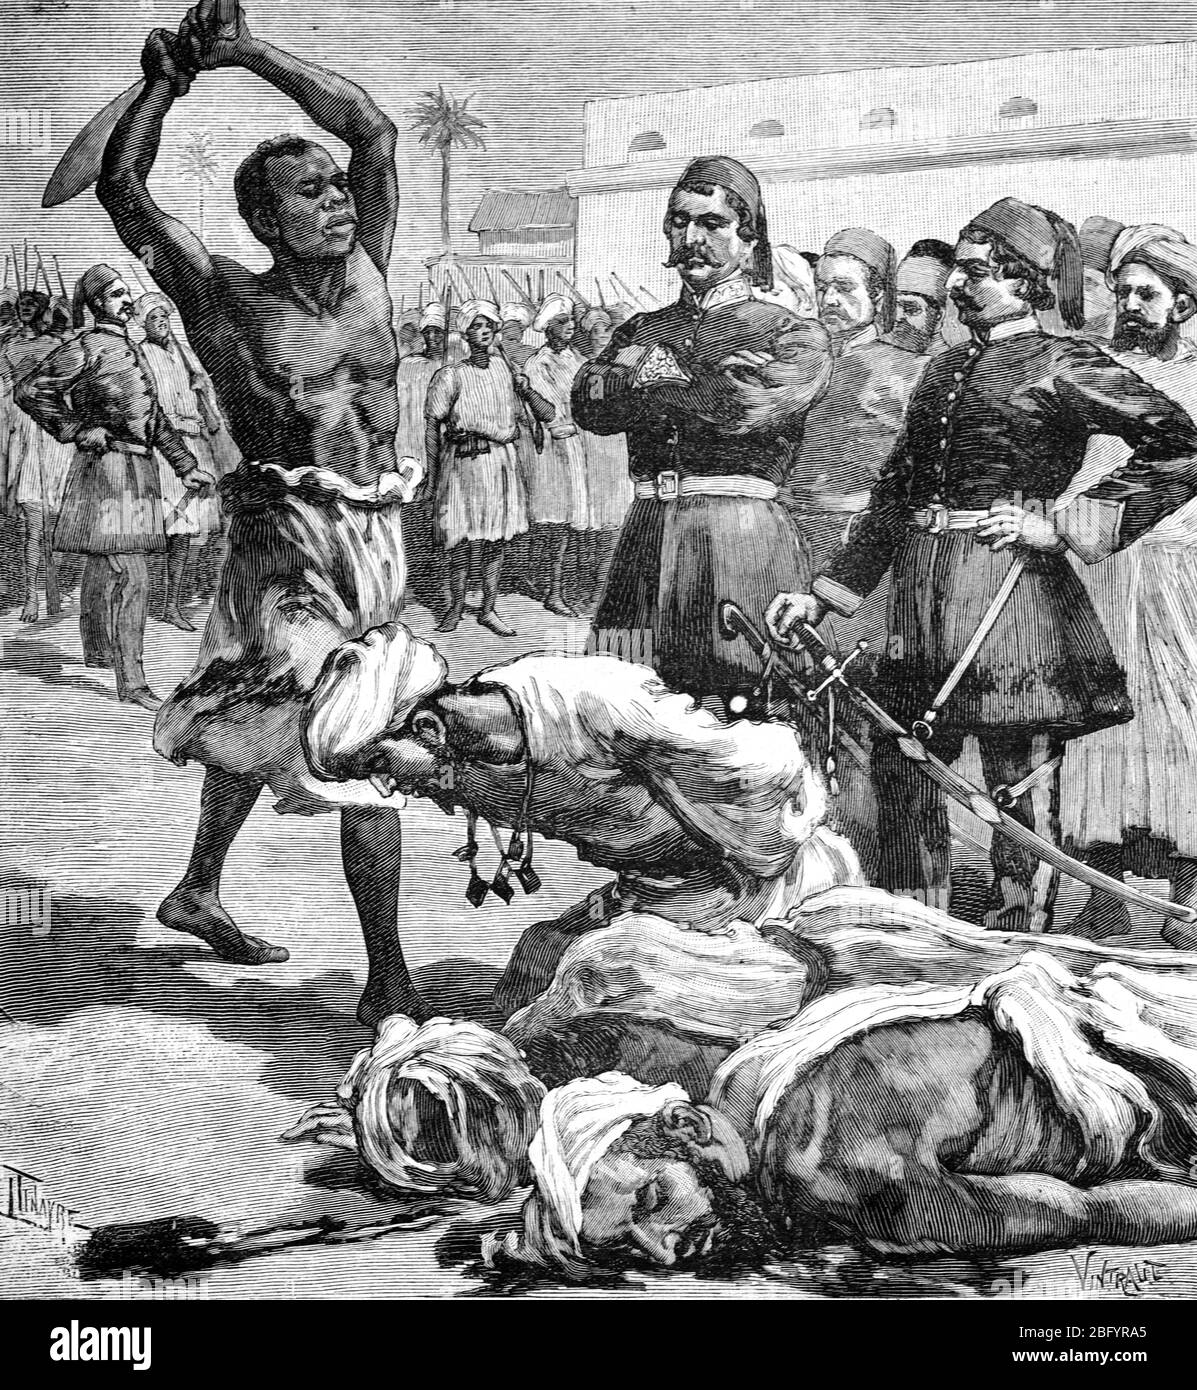 Public Execution or Beheading of Three Dervishes or Mahdist fighters in Sudan following the Defeat of the Mahdists at the Battle of Toski (Tushkah) in August 1889 by Anglo-Egyptian forces. Vintage or Old Illustration or Engraving 1890. Stock Photo